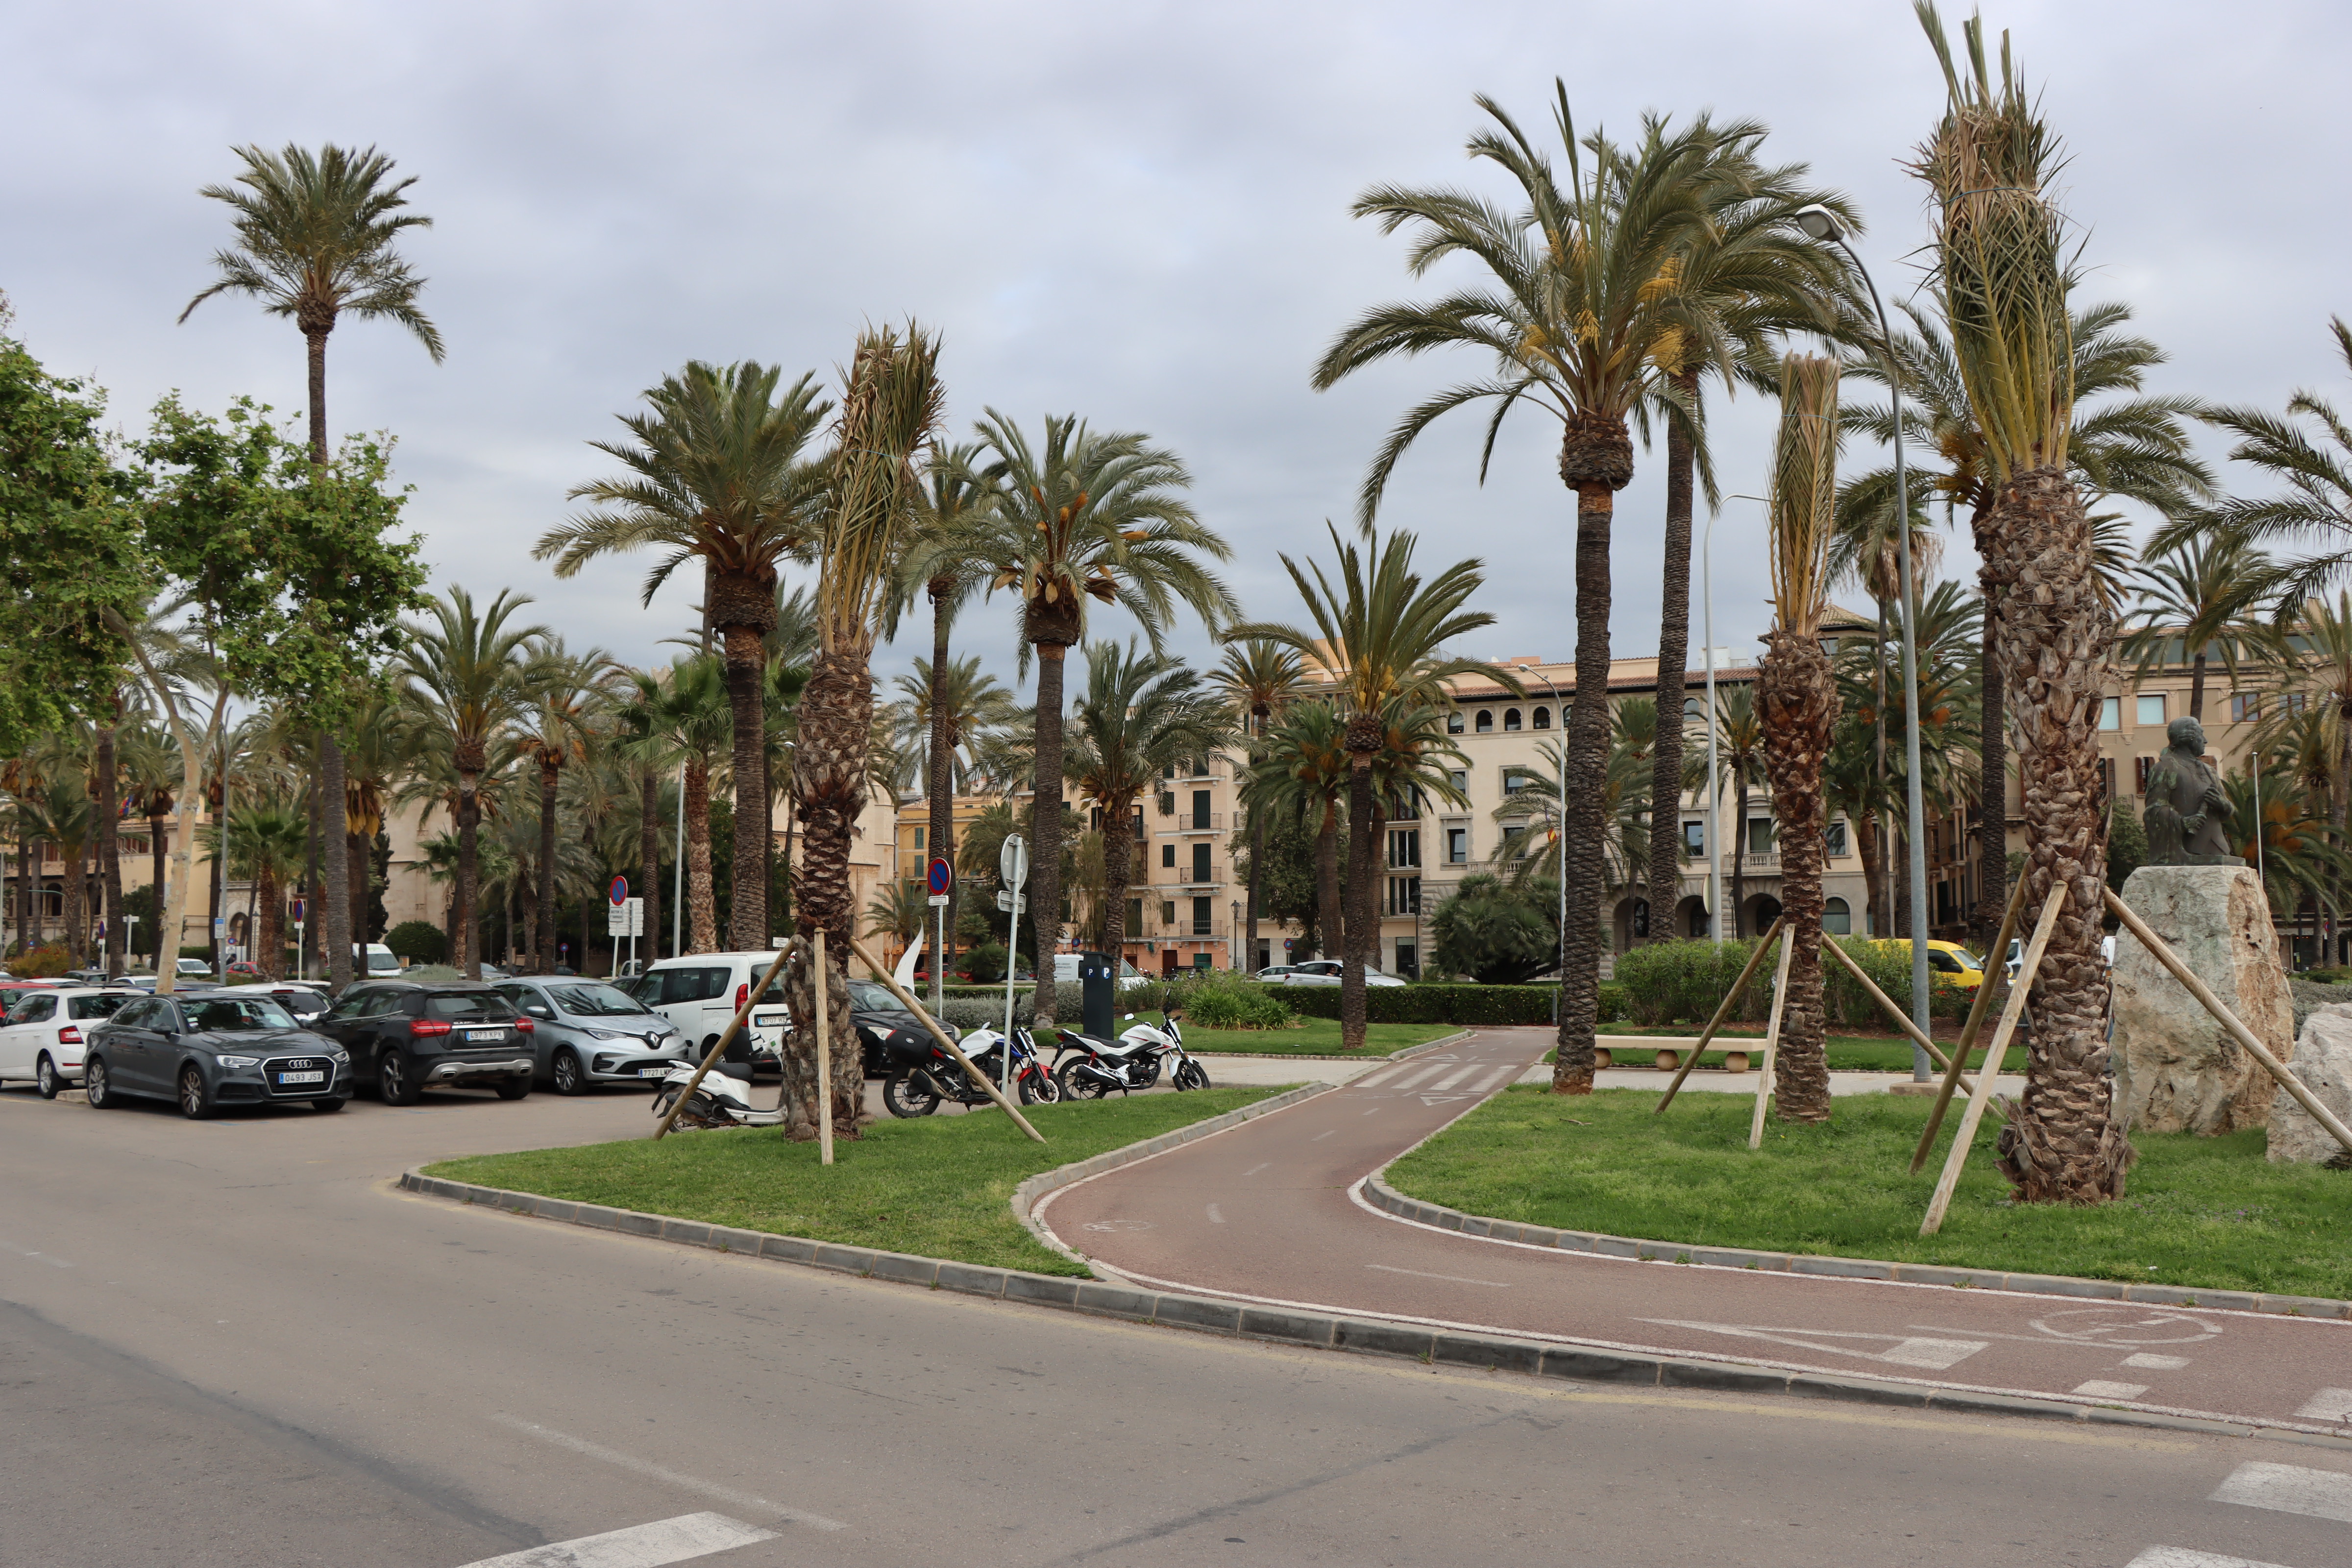 The APB will replace some 20 palm trees at structural risk in the port of Palma